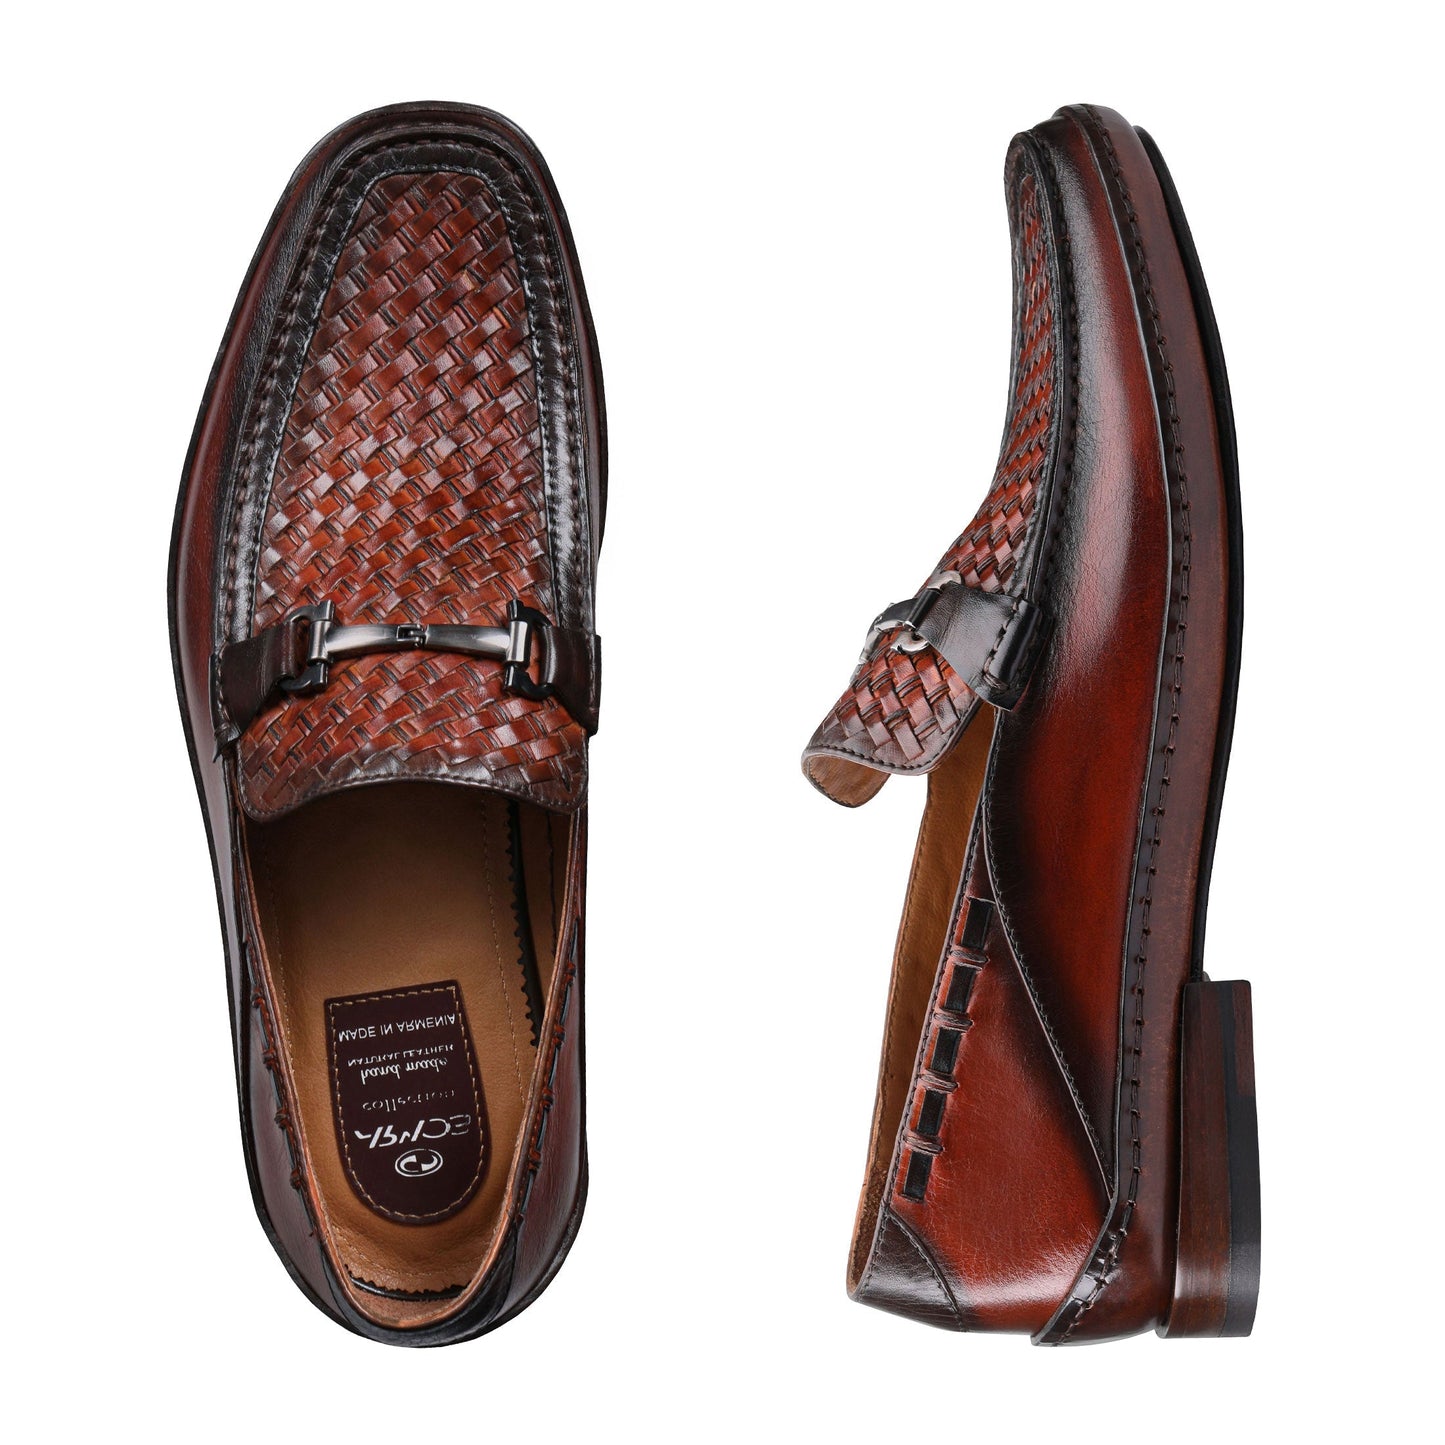 Brown woven loafers